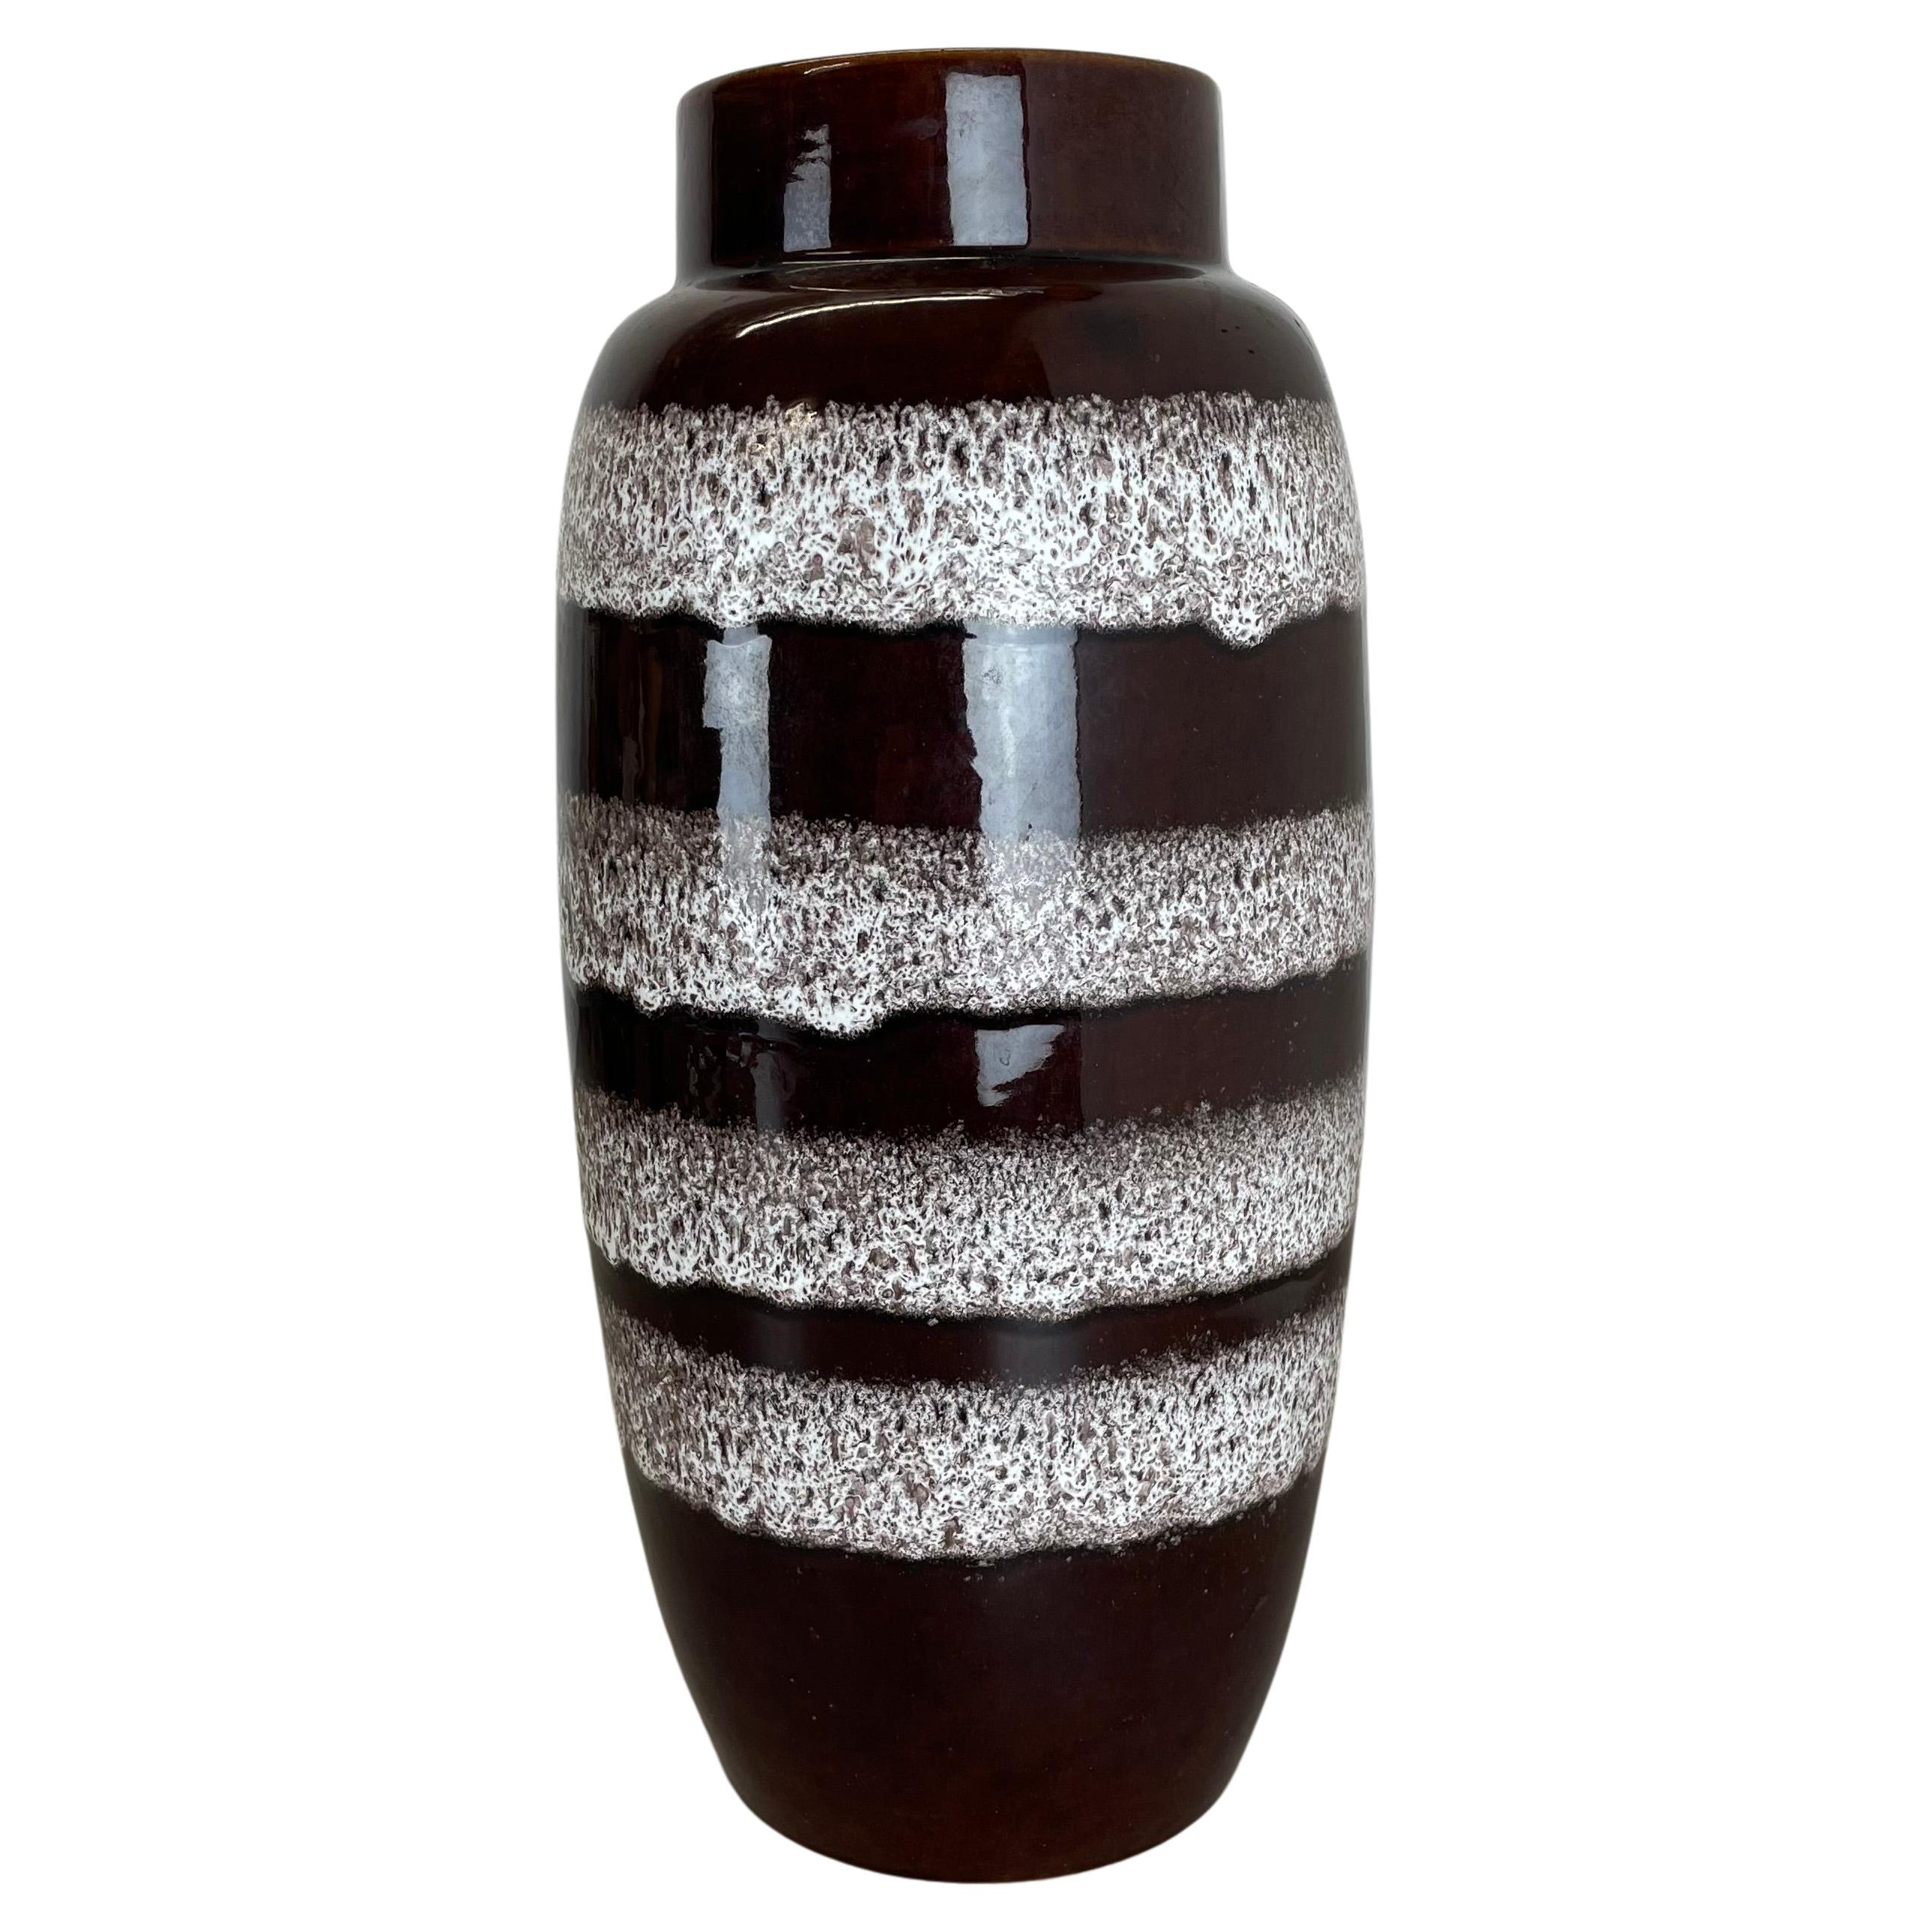 Large 39cm Pottery Fat Lava "white-rings" Floor Vase Made by Scheurich, 1970s For Sale